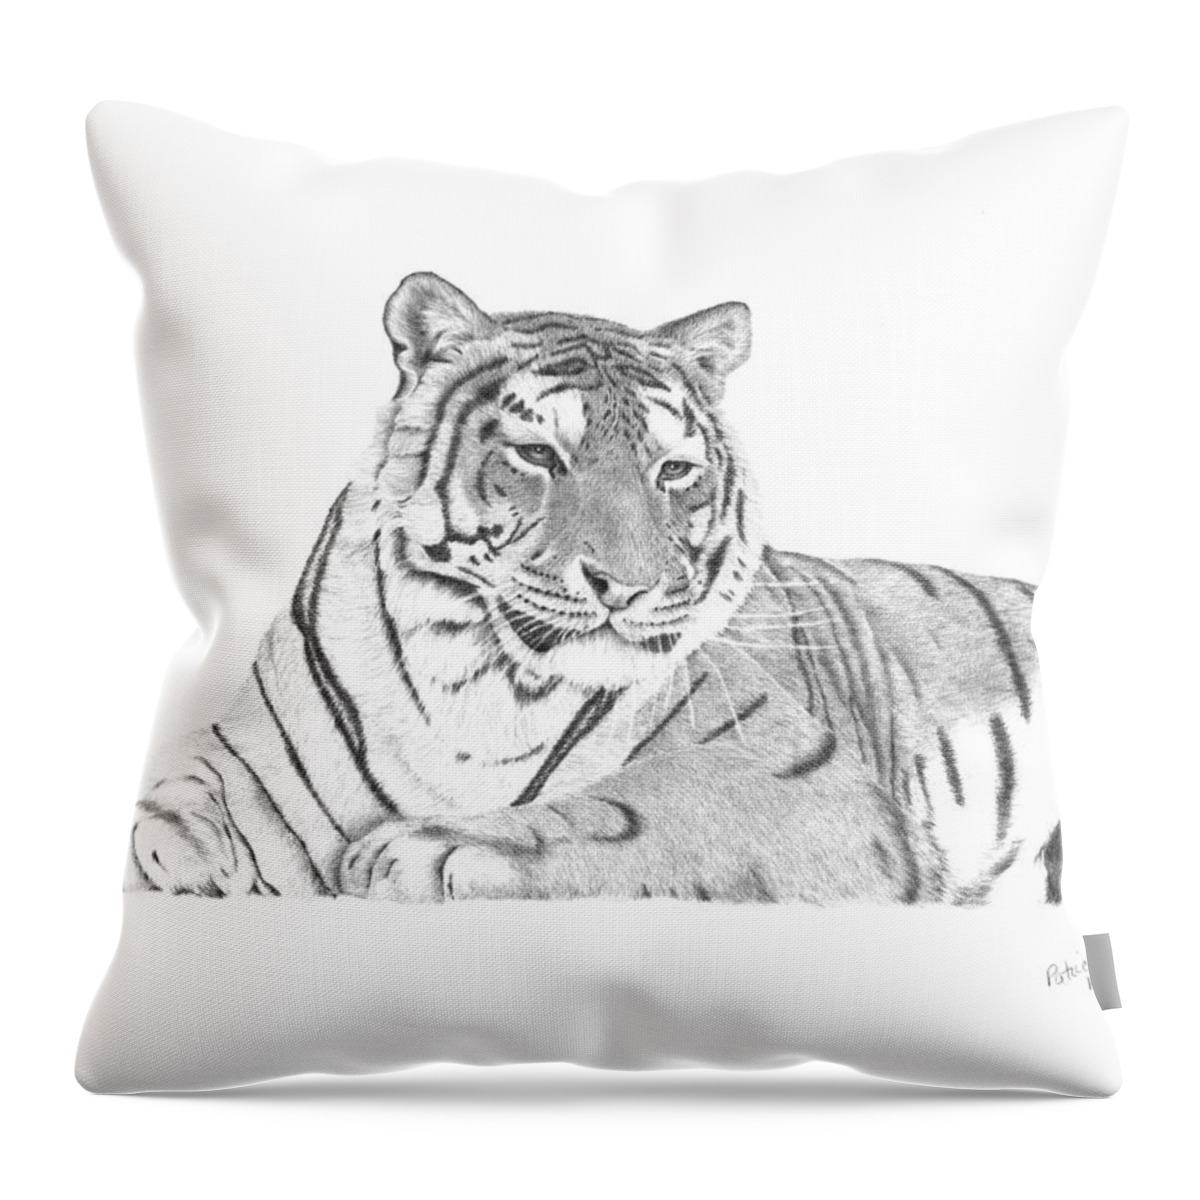 Tiger Throw Pillow featuring the drawing Zarina a Siberian Tiger by Patricia Hiltz